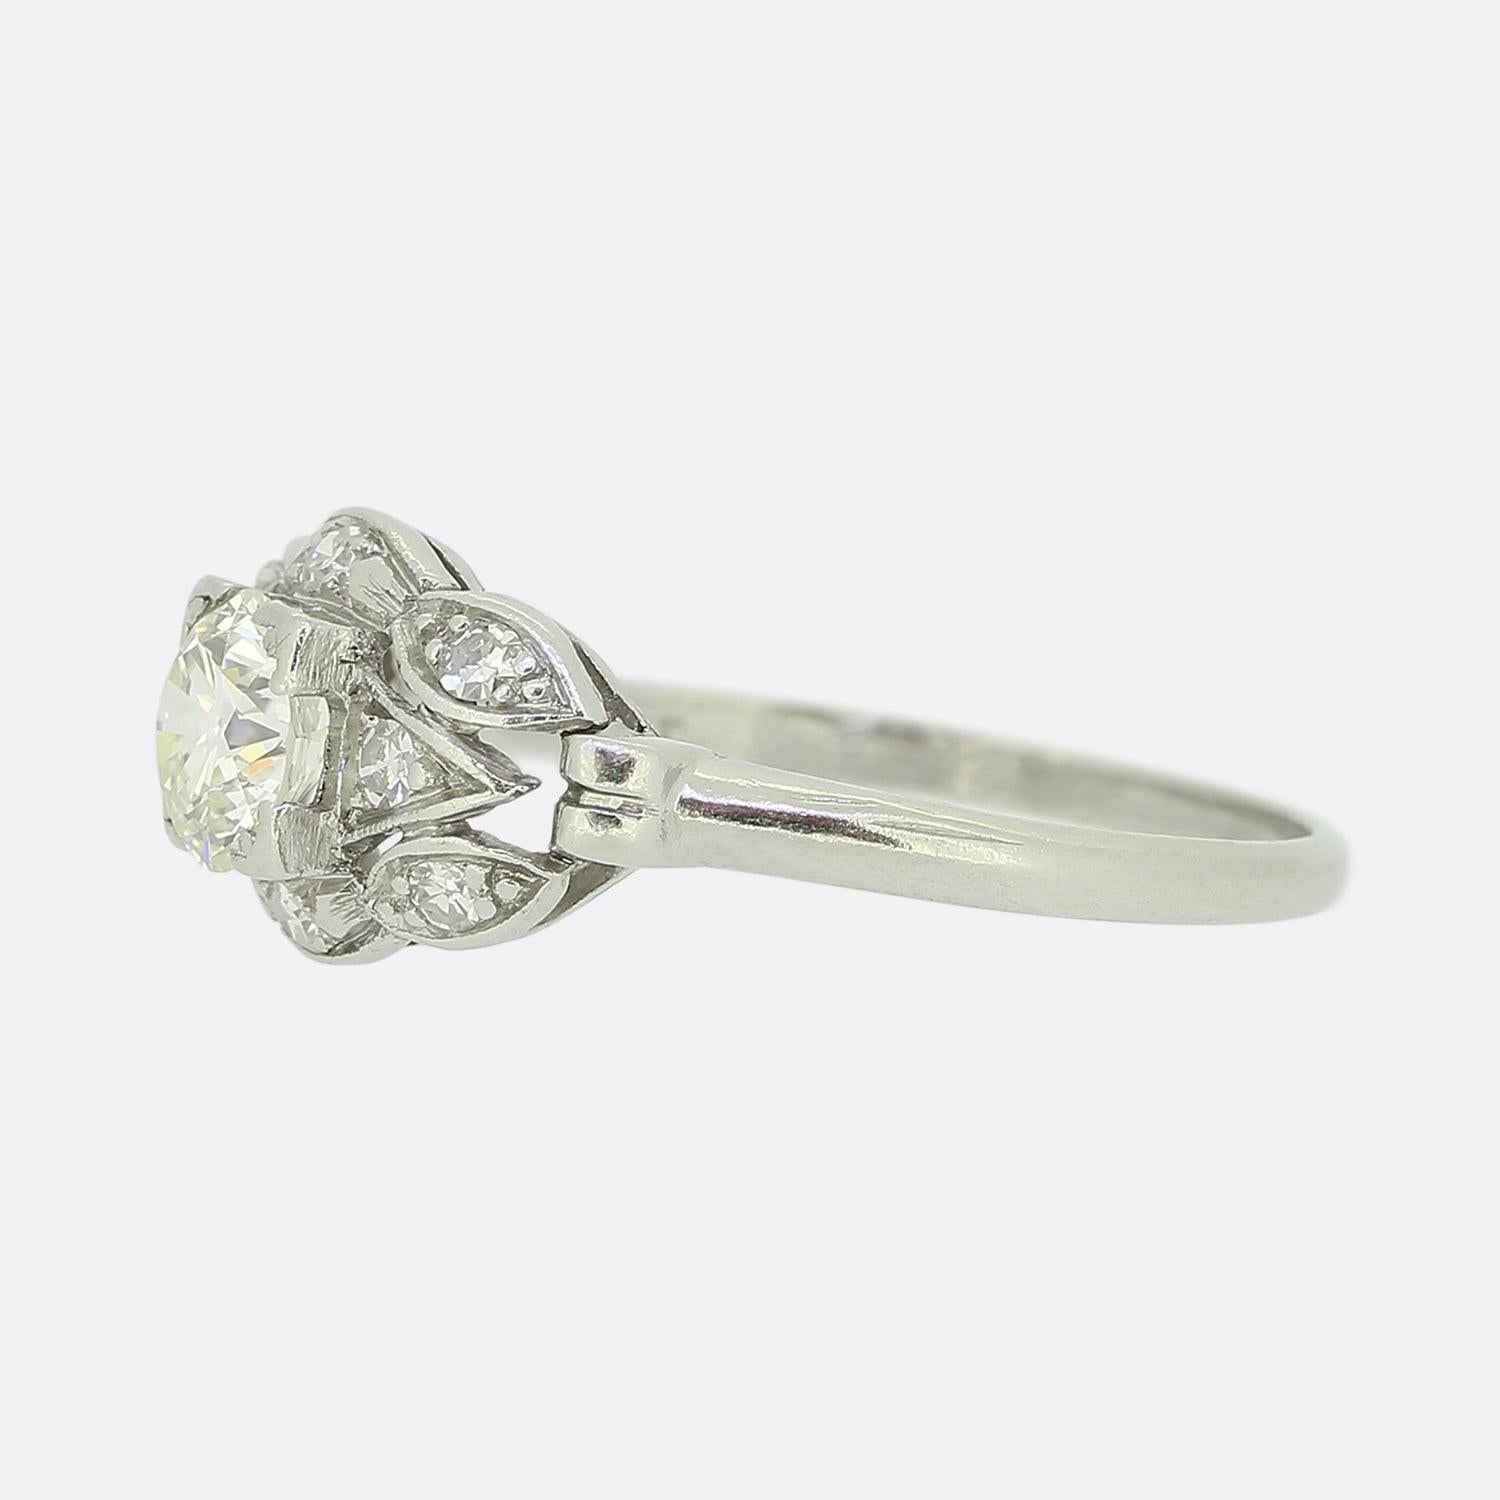 Here we have a lovely platinum diamond cluster ring. A focal 0.55ct round faceted old cut diamond sits slightly risen at the centre of the face in a four clawed setting. This piece takes on a floral-like design with multiple claw set single cut